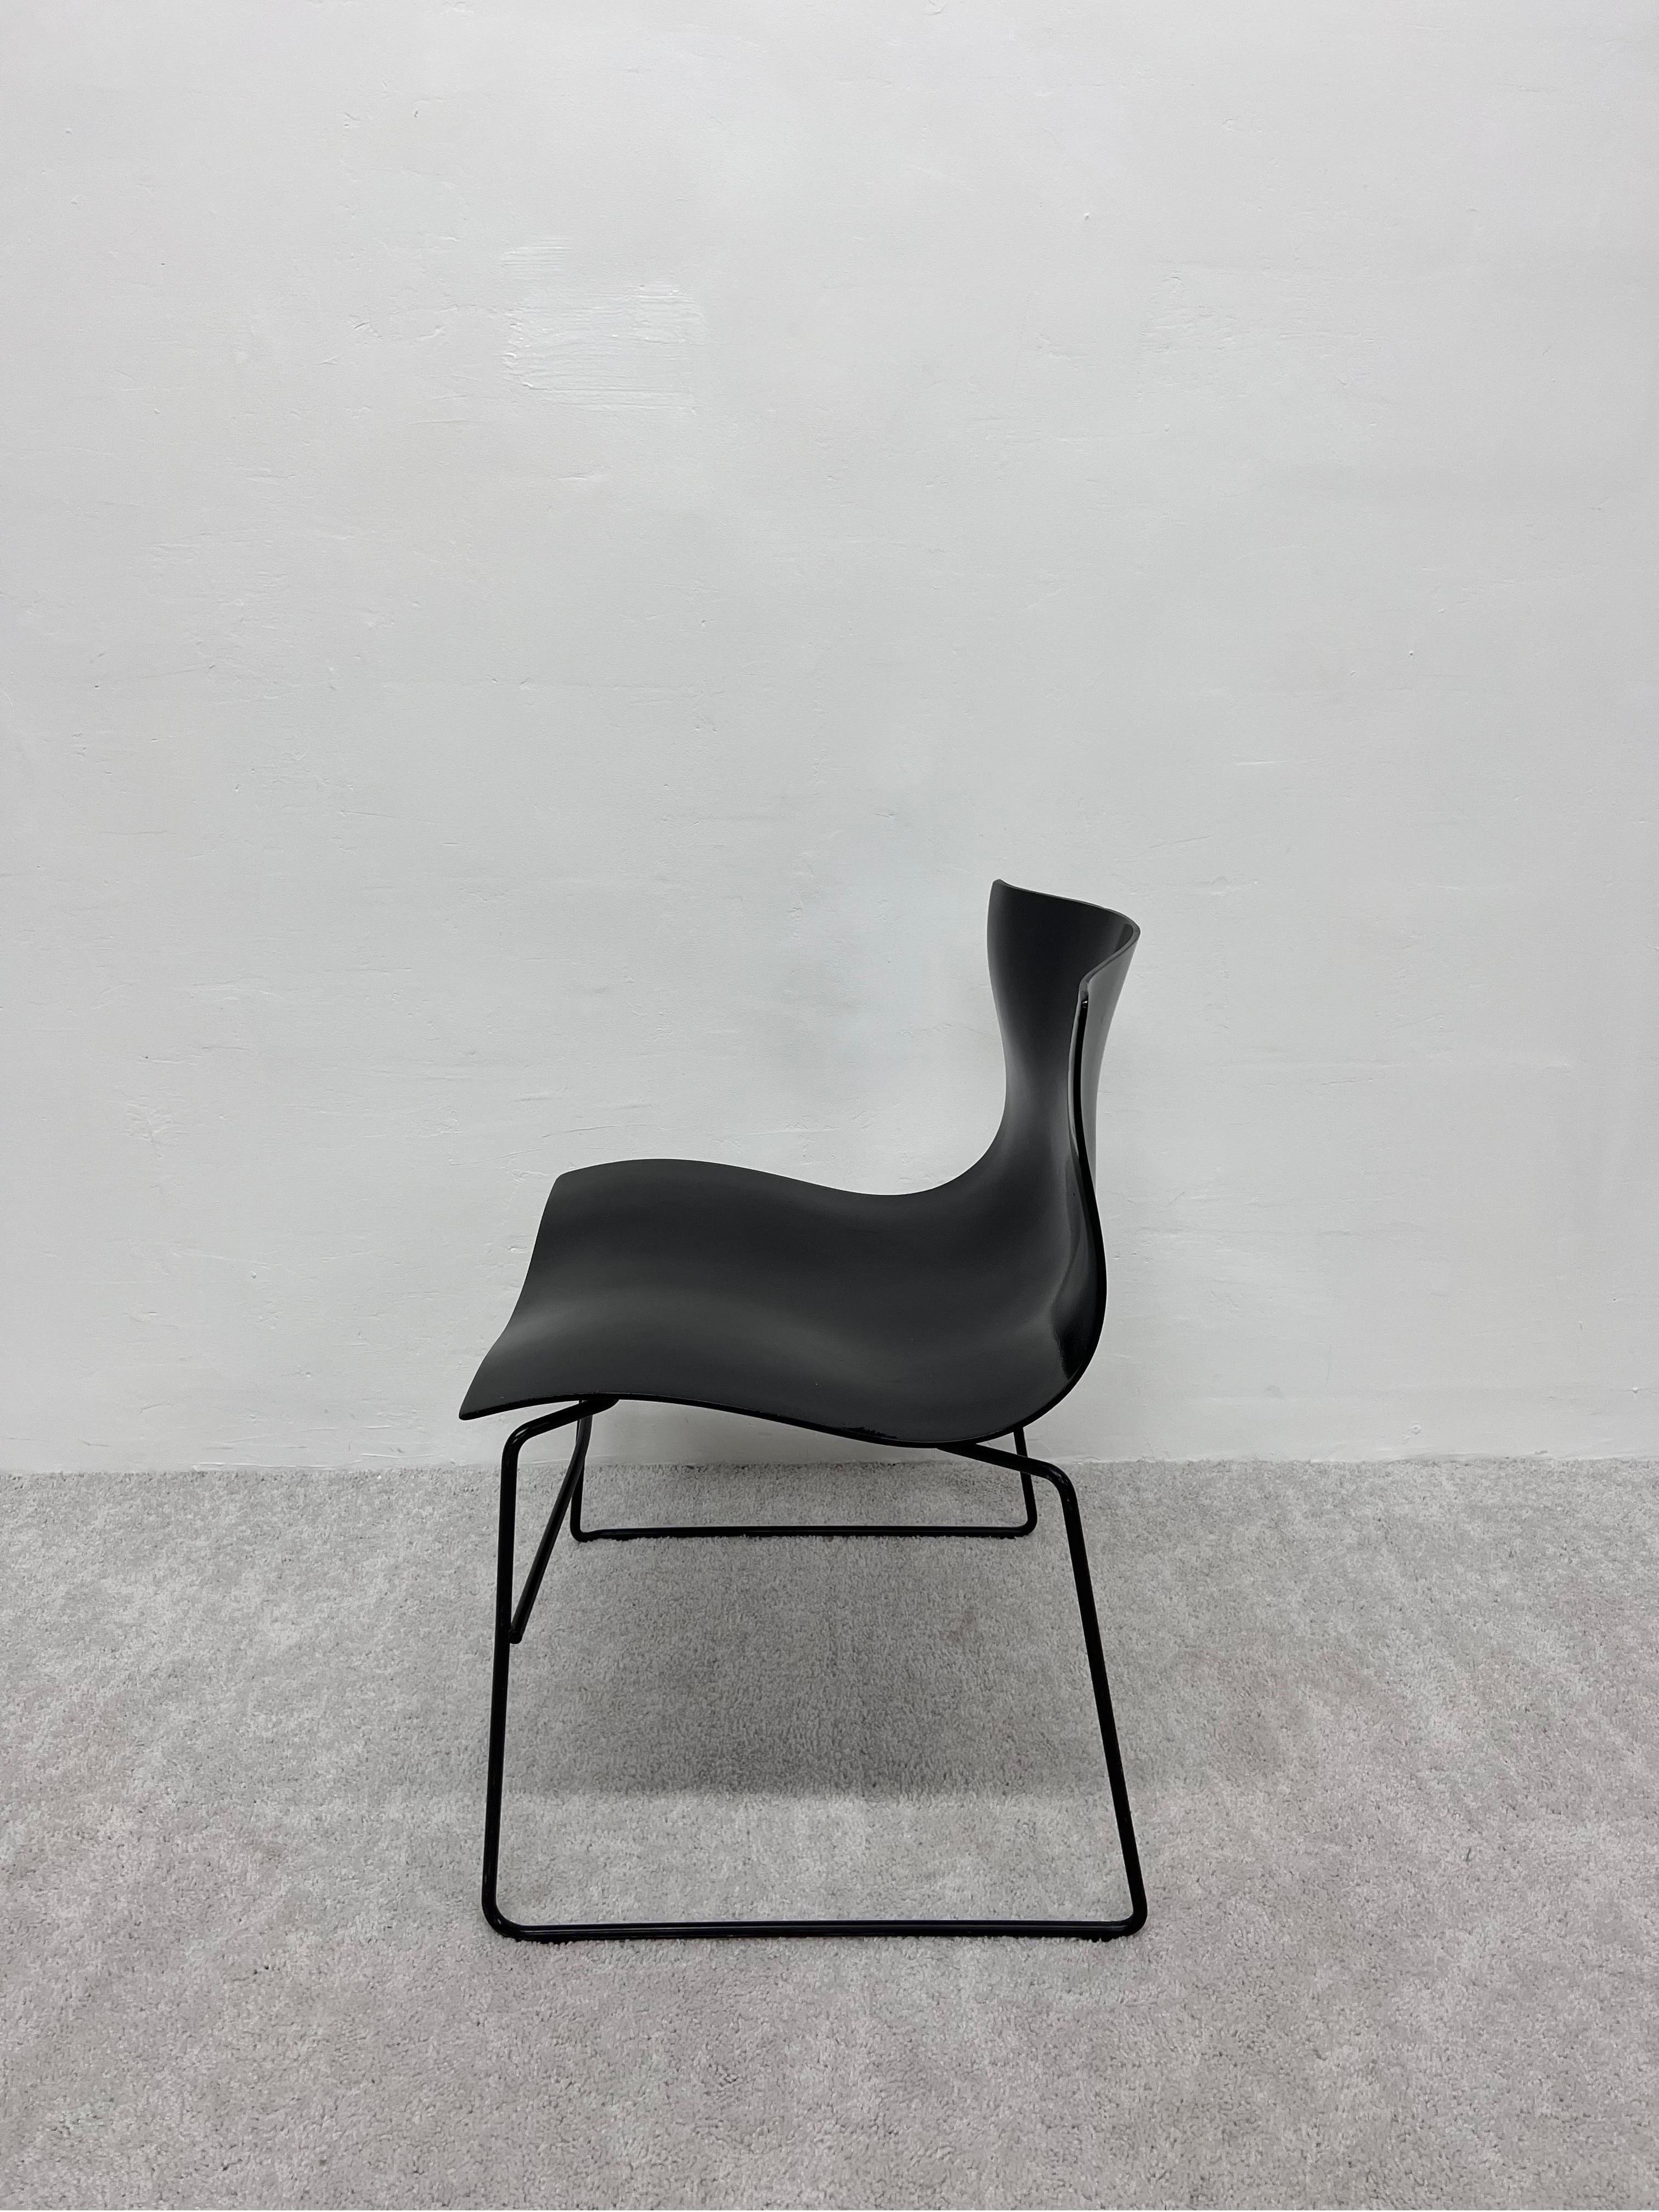 Lacquered Lella and Massimo Vignelli Handkerchief Chairs for Knoll, Set of Four For Sale